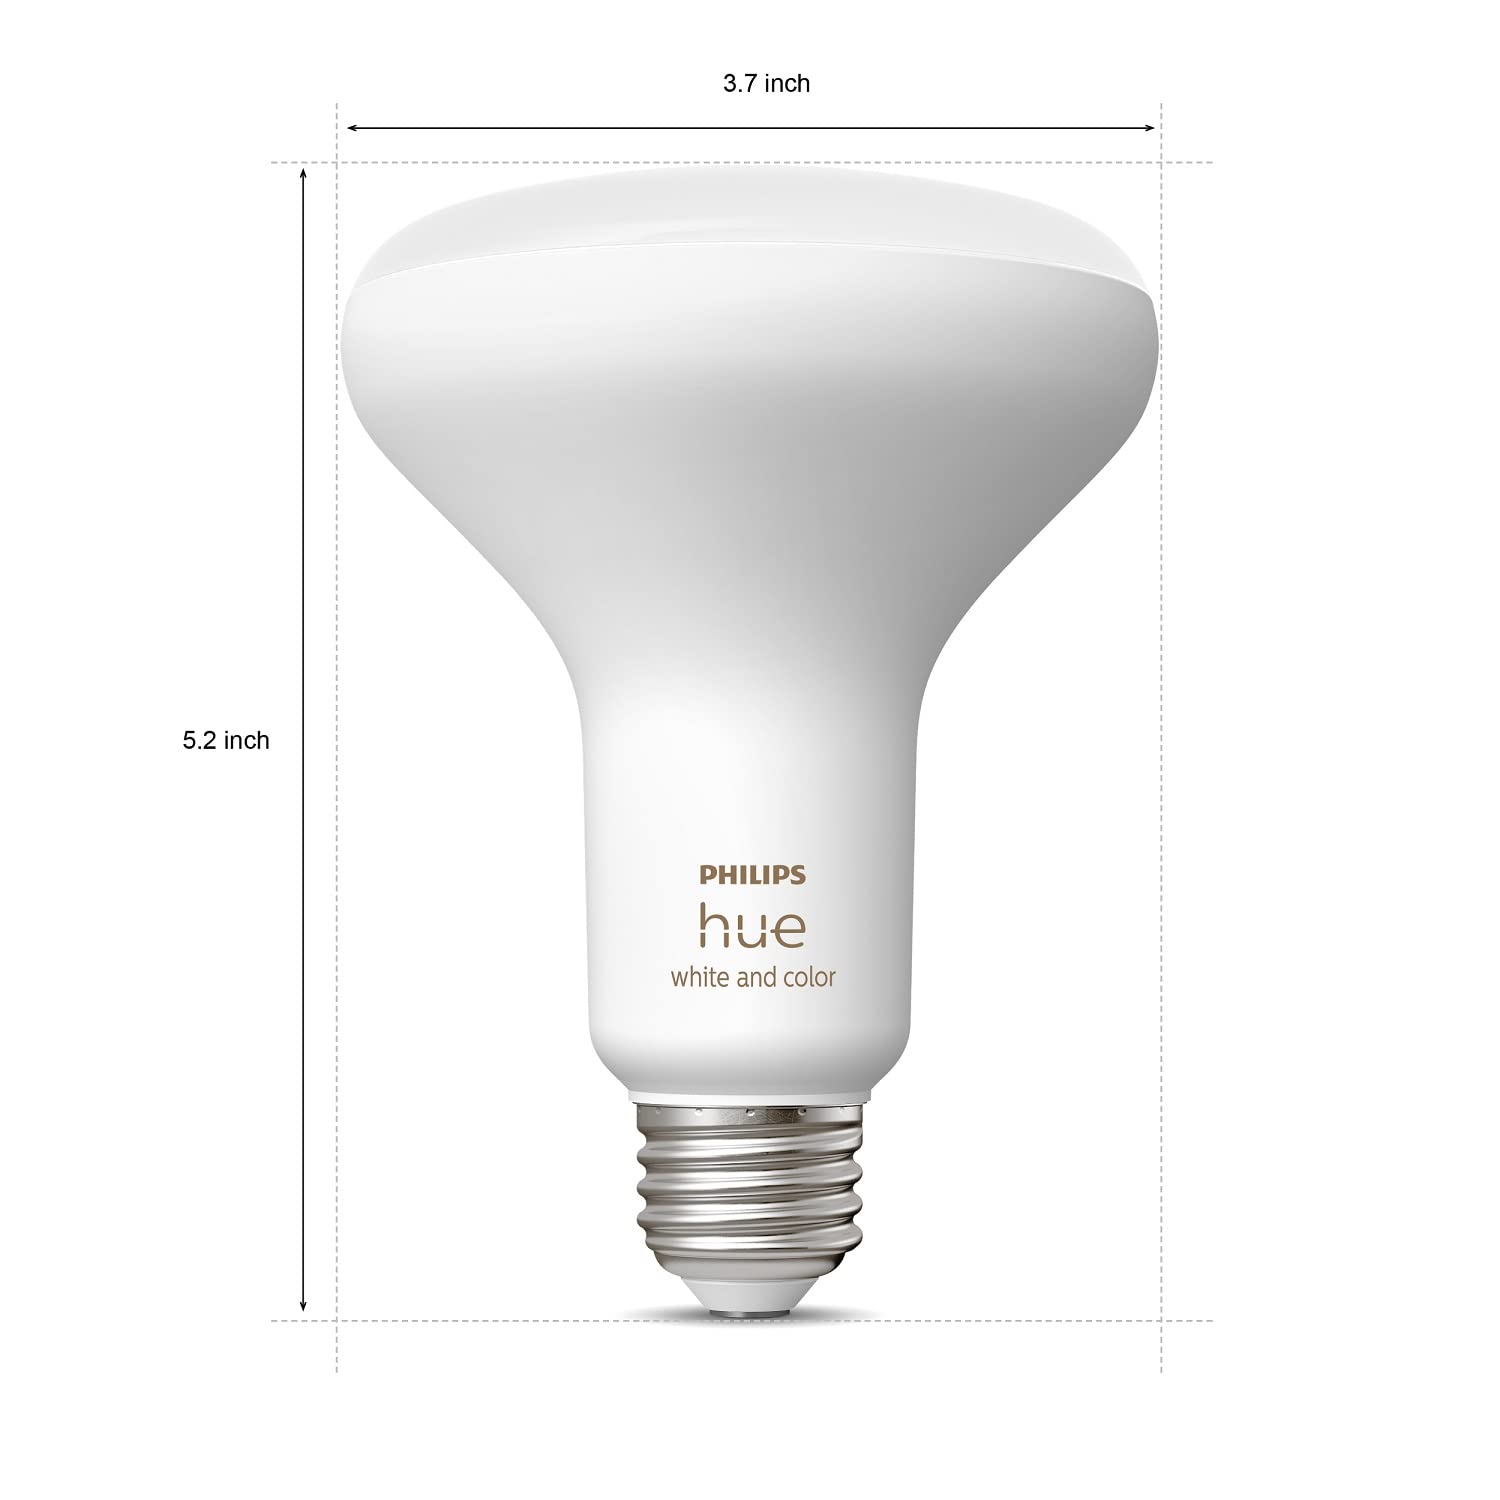 Philips Hue White & Color Ambiance BR30 LED Smart Bulbs, 16 Million Colors (Hue Hub Required), New Version, 2 Bulbs $61.13